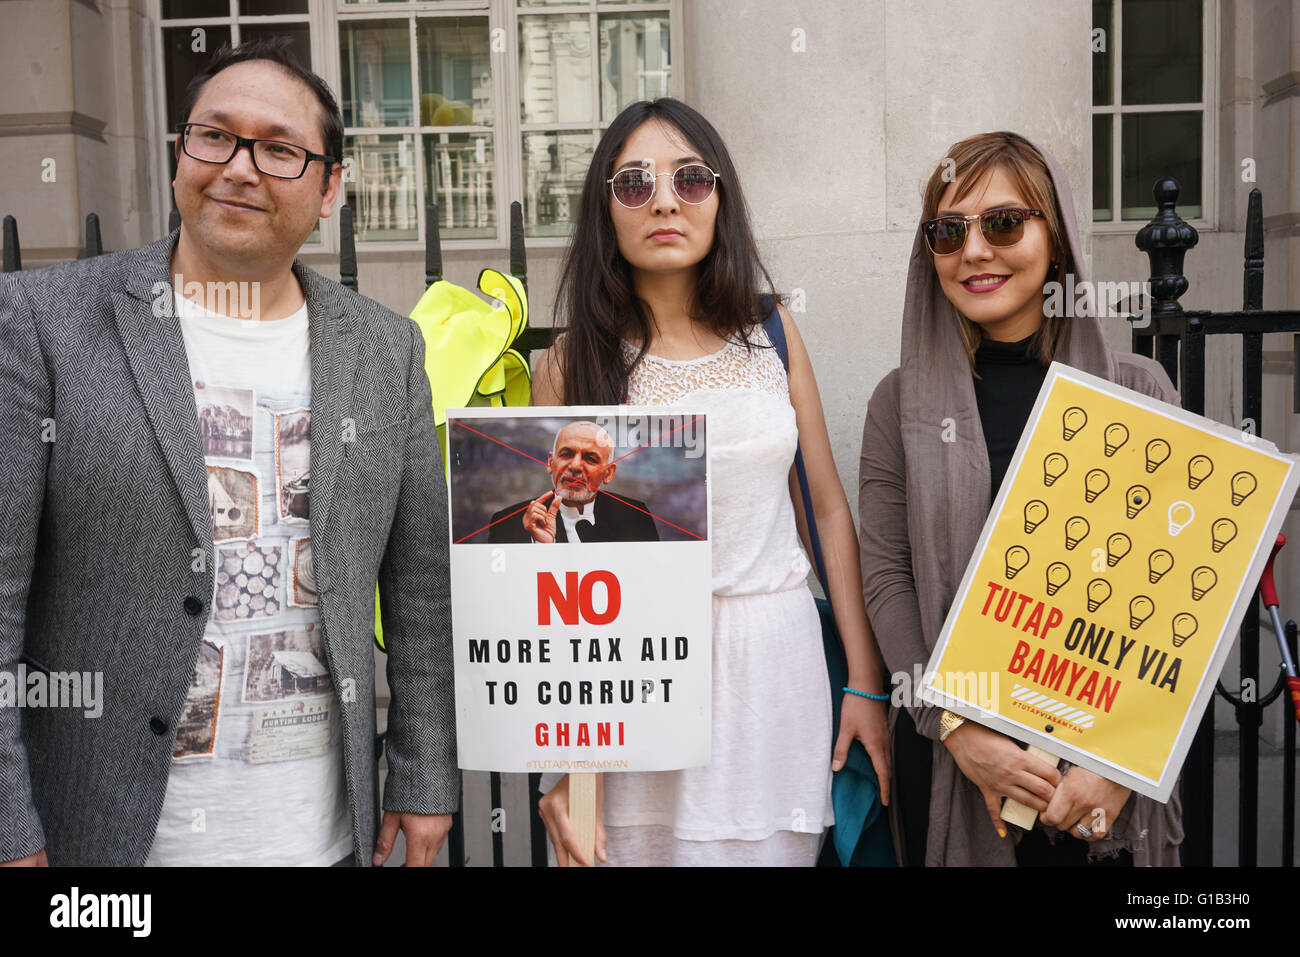 London, UK. 12th May, 2016. Hundreds of Hazara Afghan’s protest of Ashram Ghani to Stop lying to the World of changing direction away from Burma for it electric supply is  racist and against humanity outside Commonwealth Secretariat Marlborough House, Pall Mall, London. Credit:  See Li/Alamy Live News Stock Photo